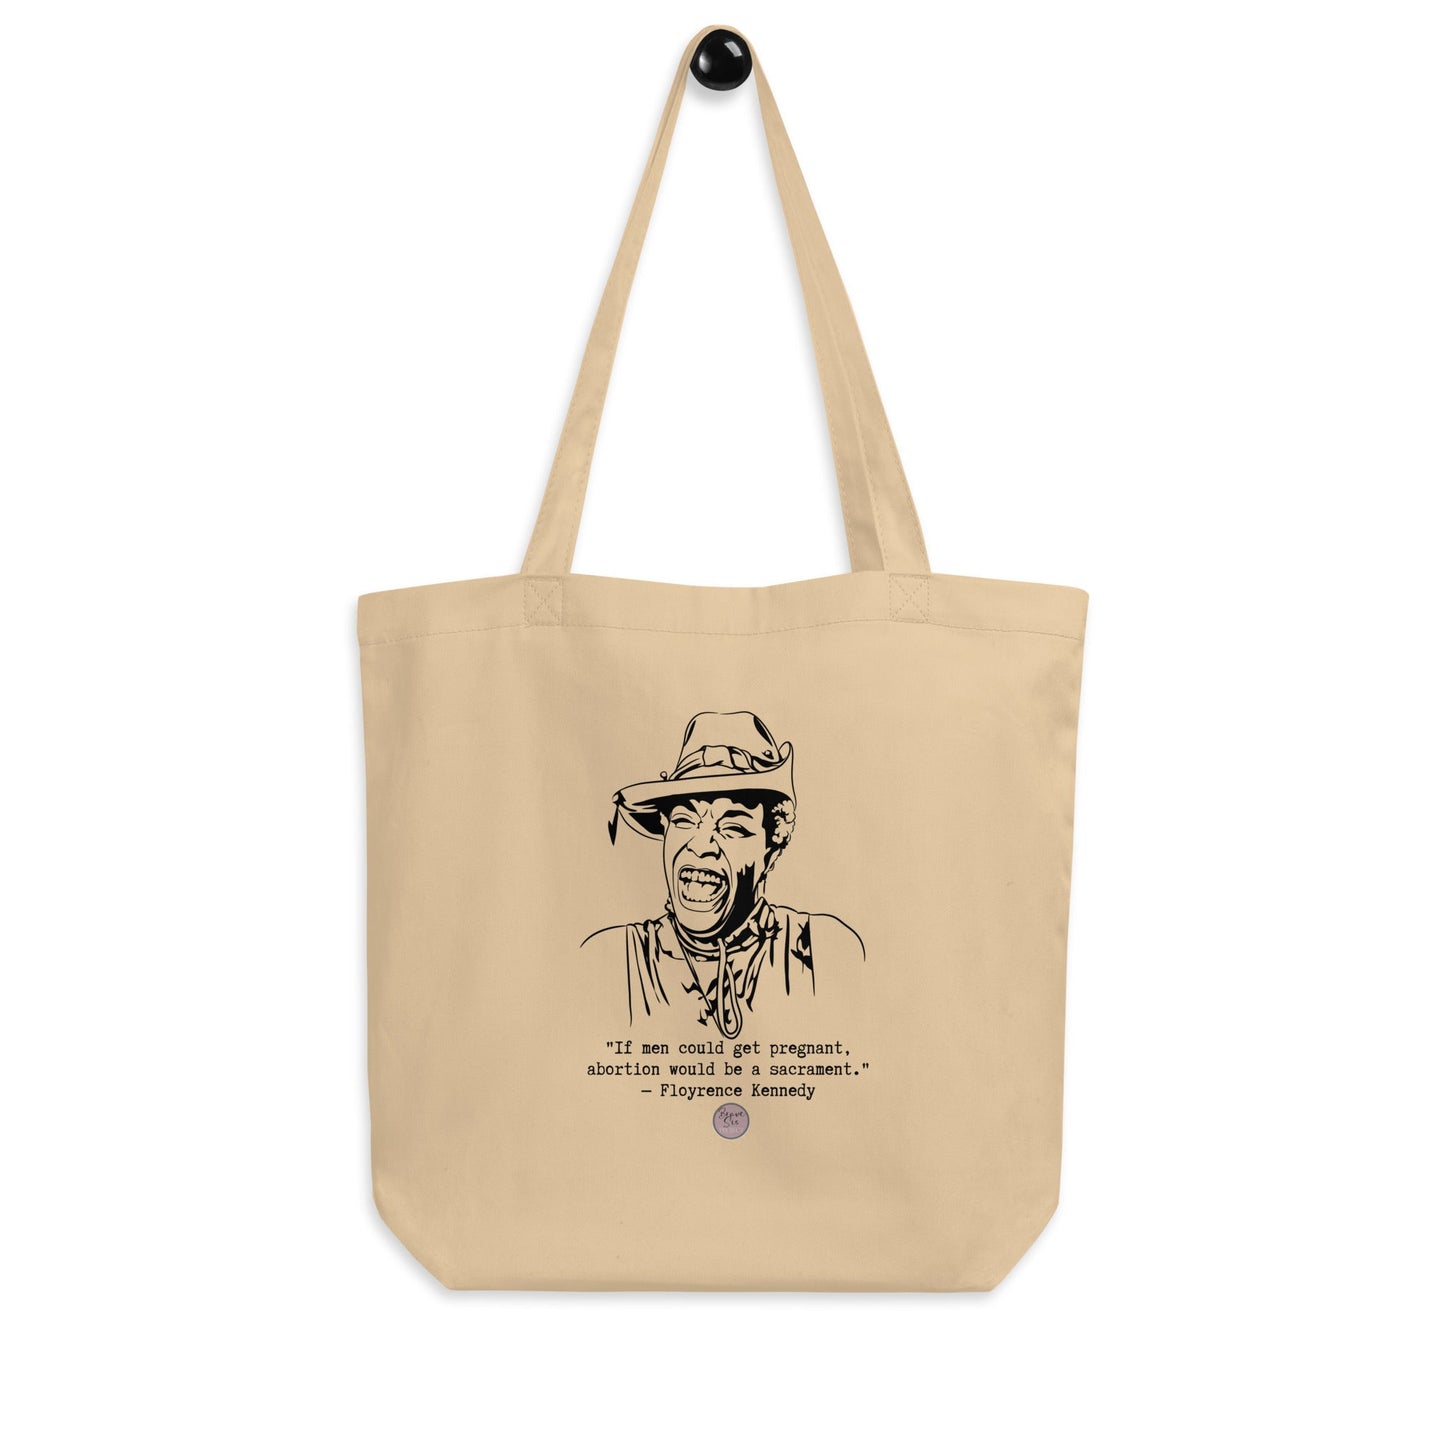 Floyrence Kennedy "If Men Could Get Pregnant" Eco Tote Bag